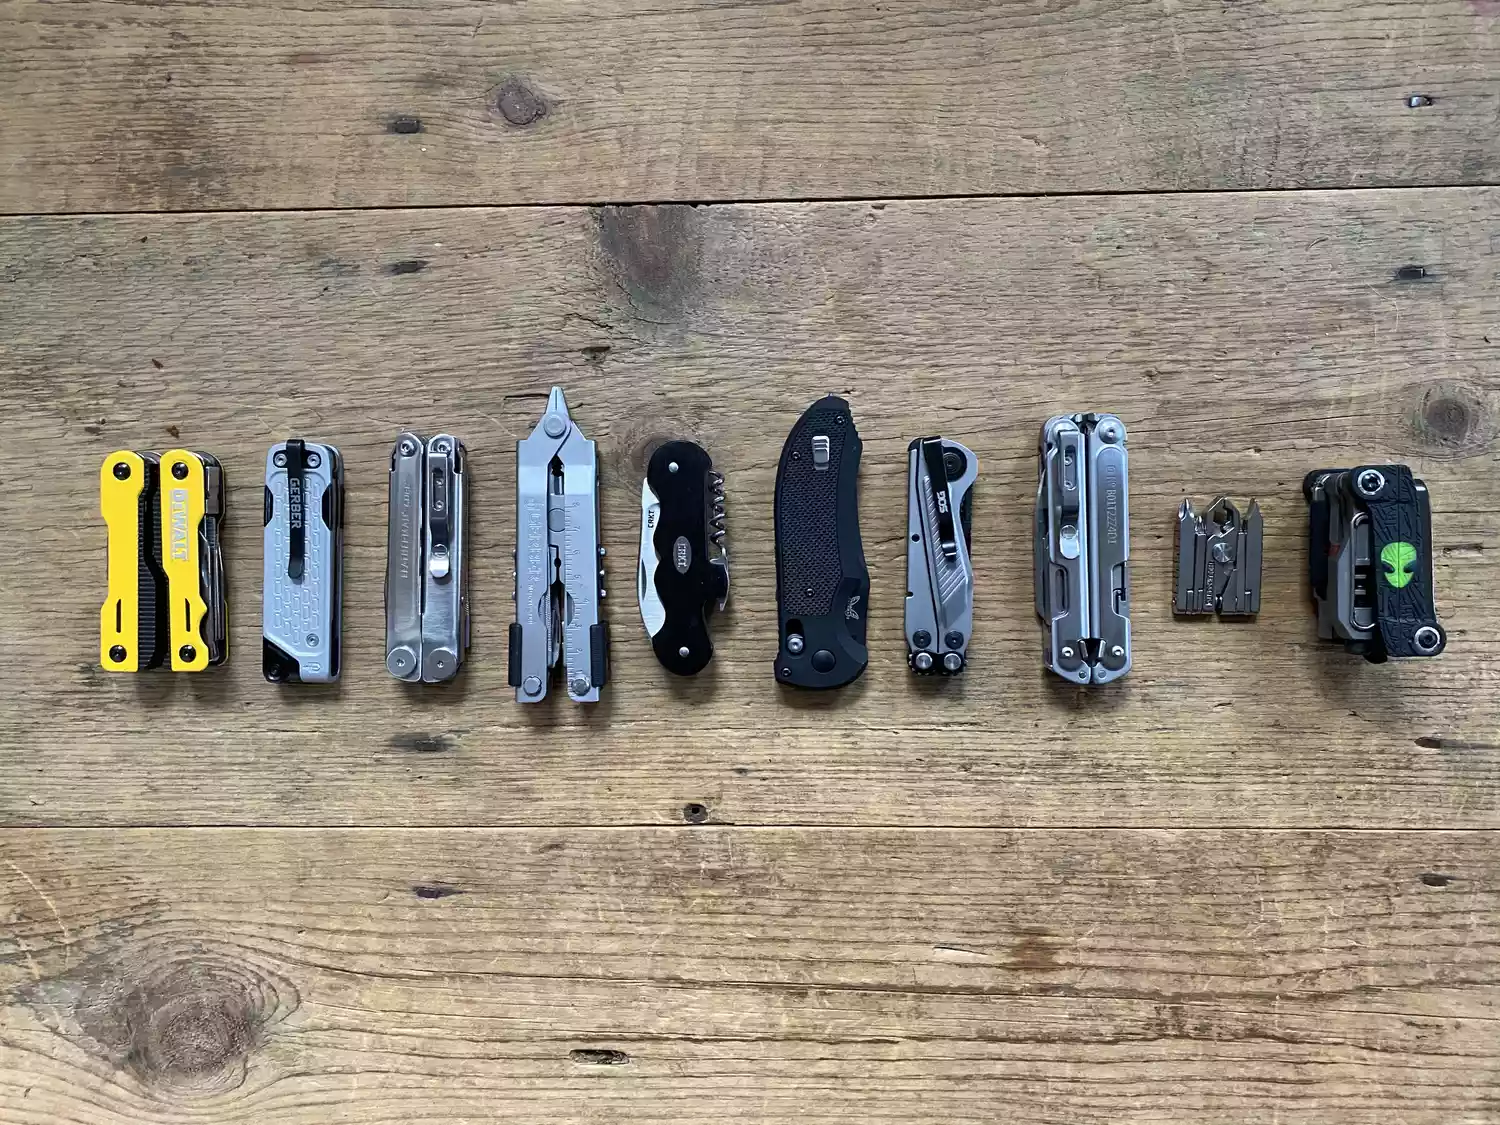 We tested the best multitools to carry.